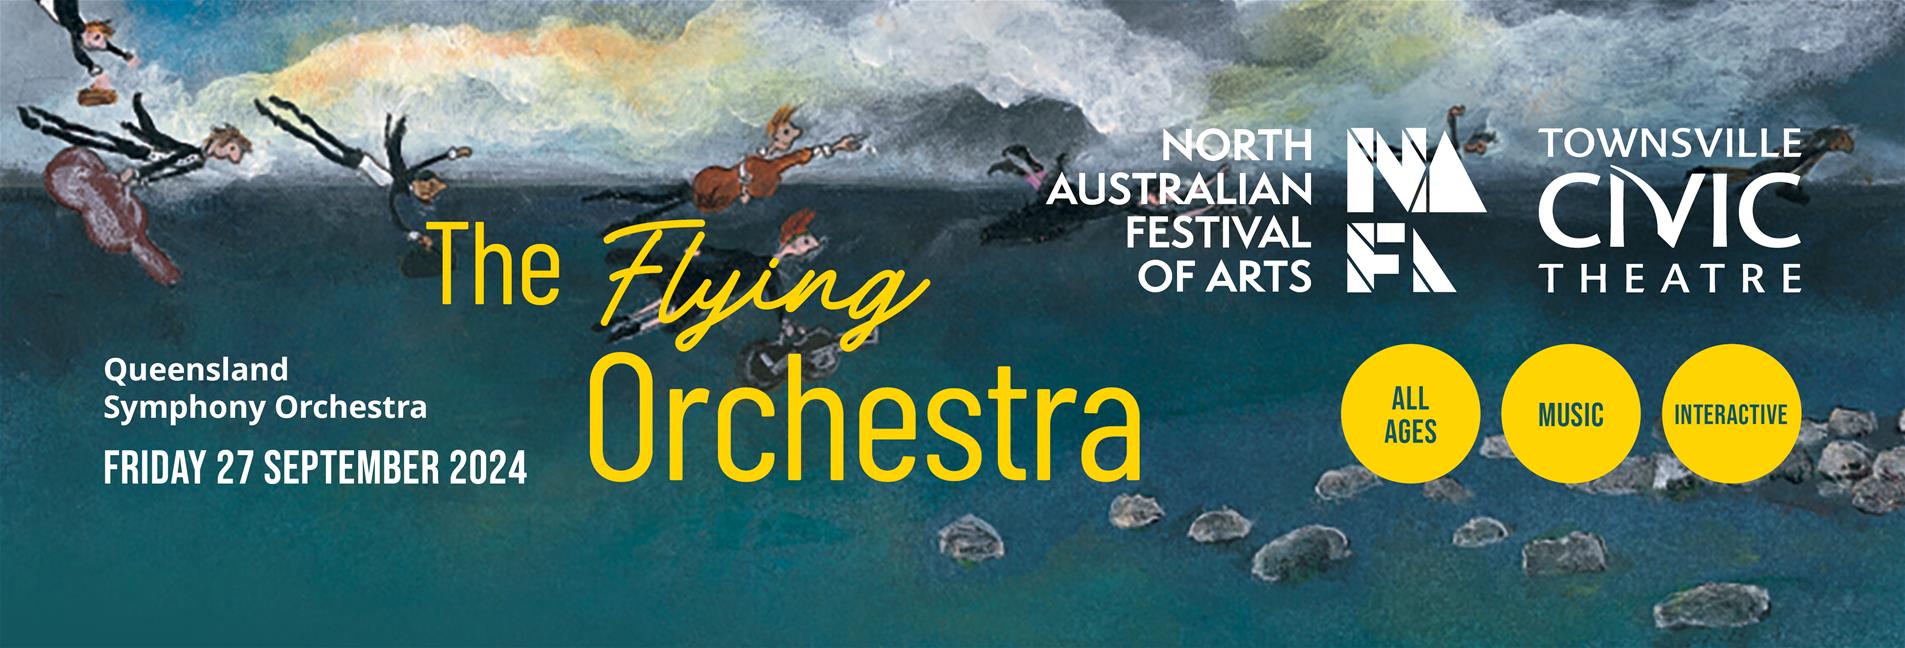 alt= Banner for "The Flying Orchestra" event featuring the Queensland Symphony Orchestra at Townsville Civic Theatre on september 27, 2024, with whimsical airborne animals and instruments."